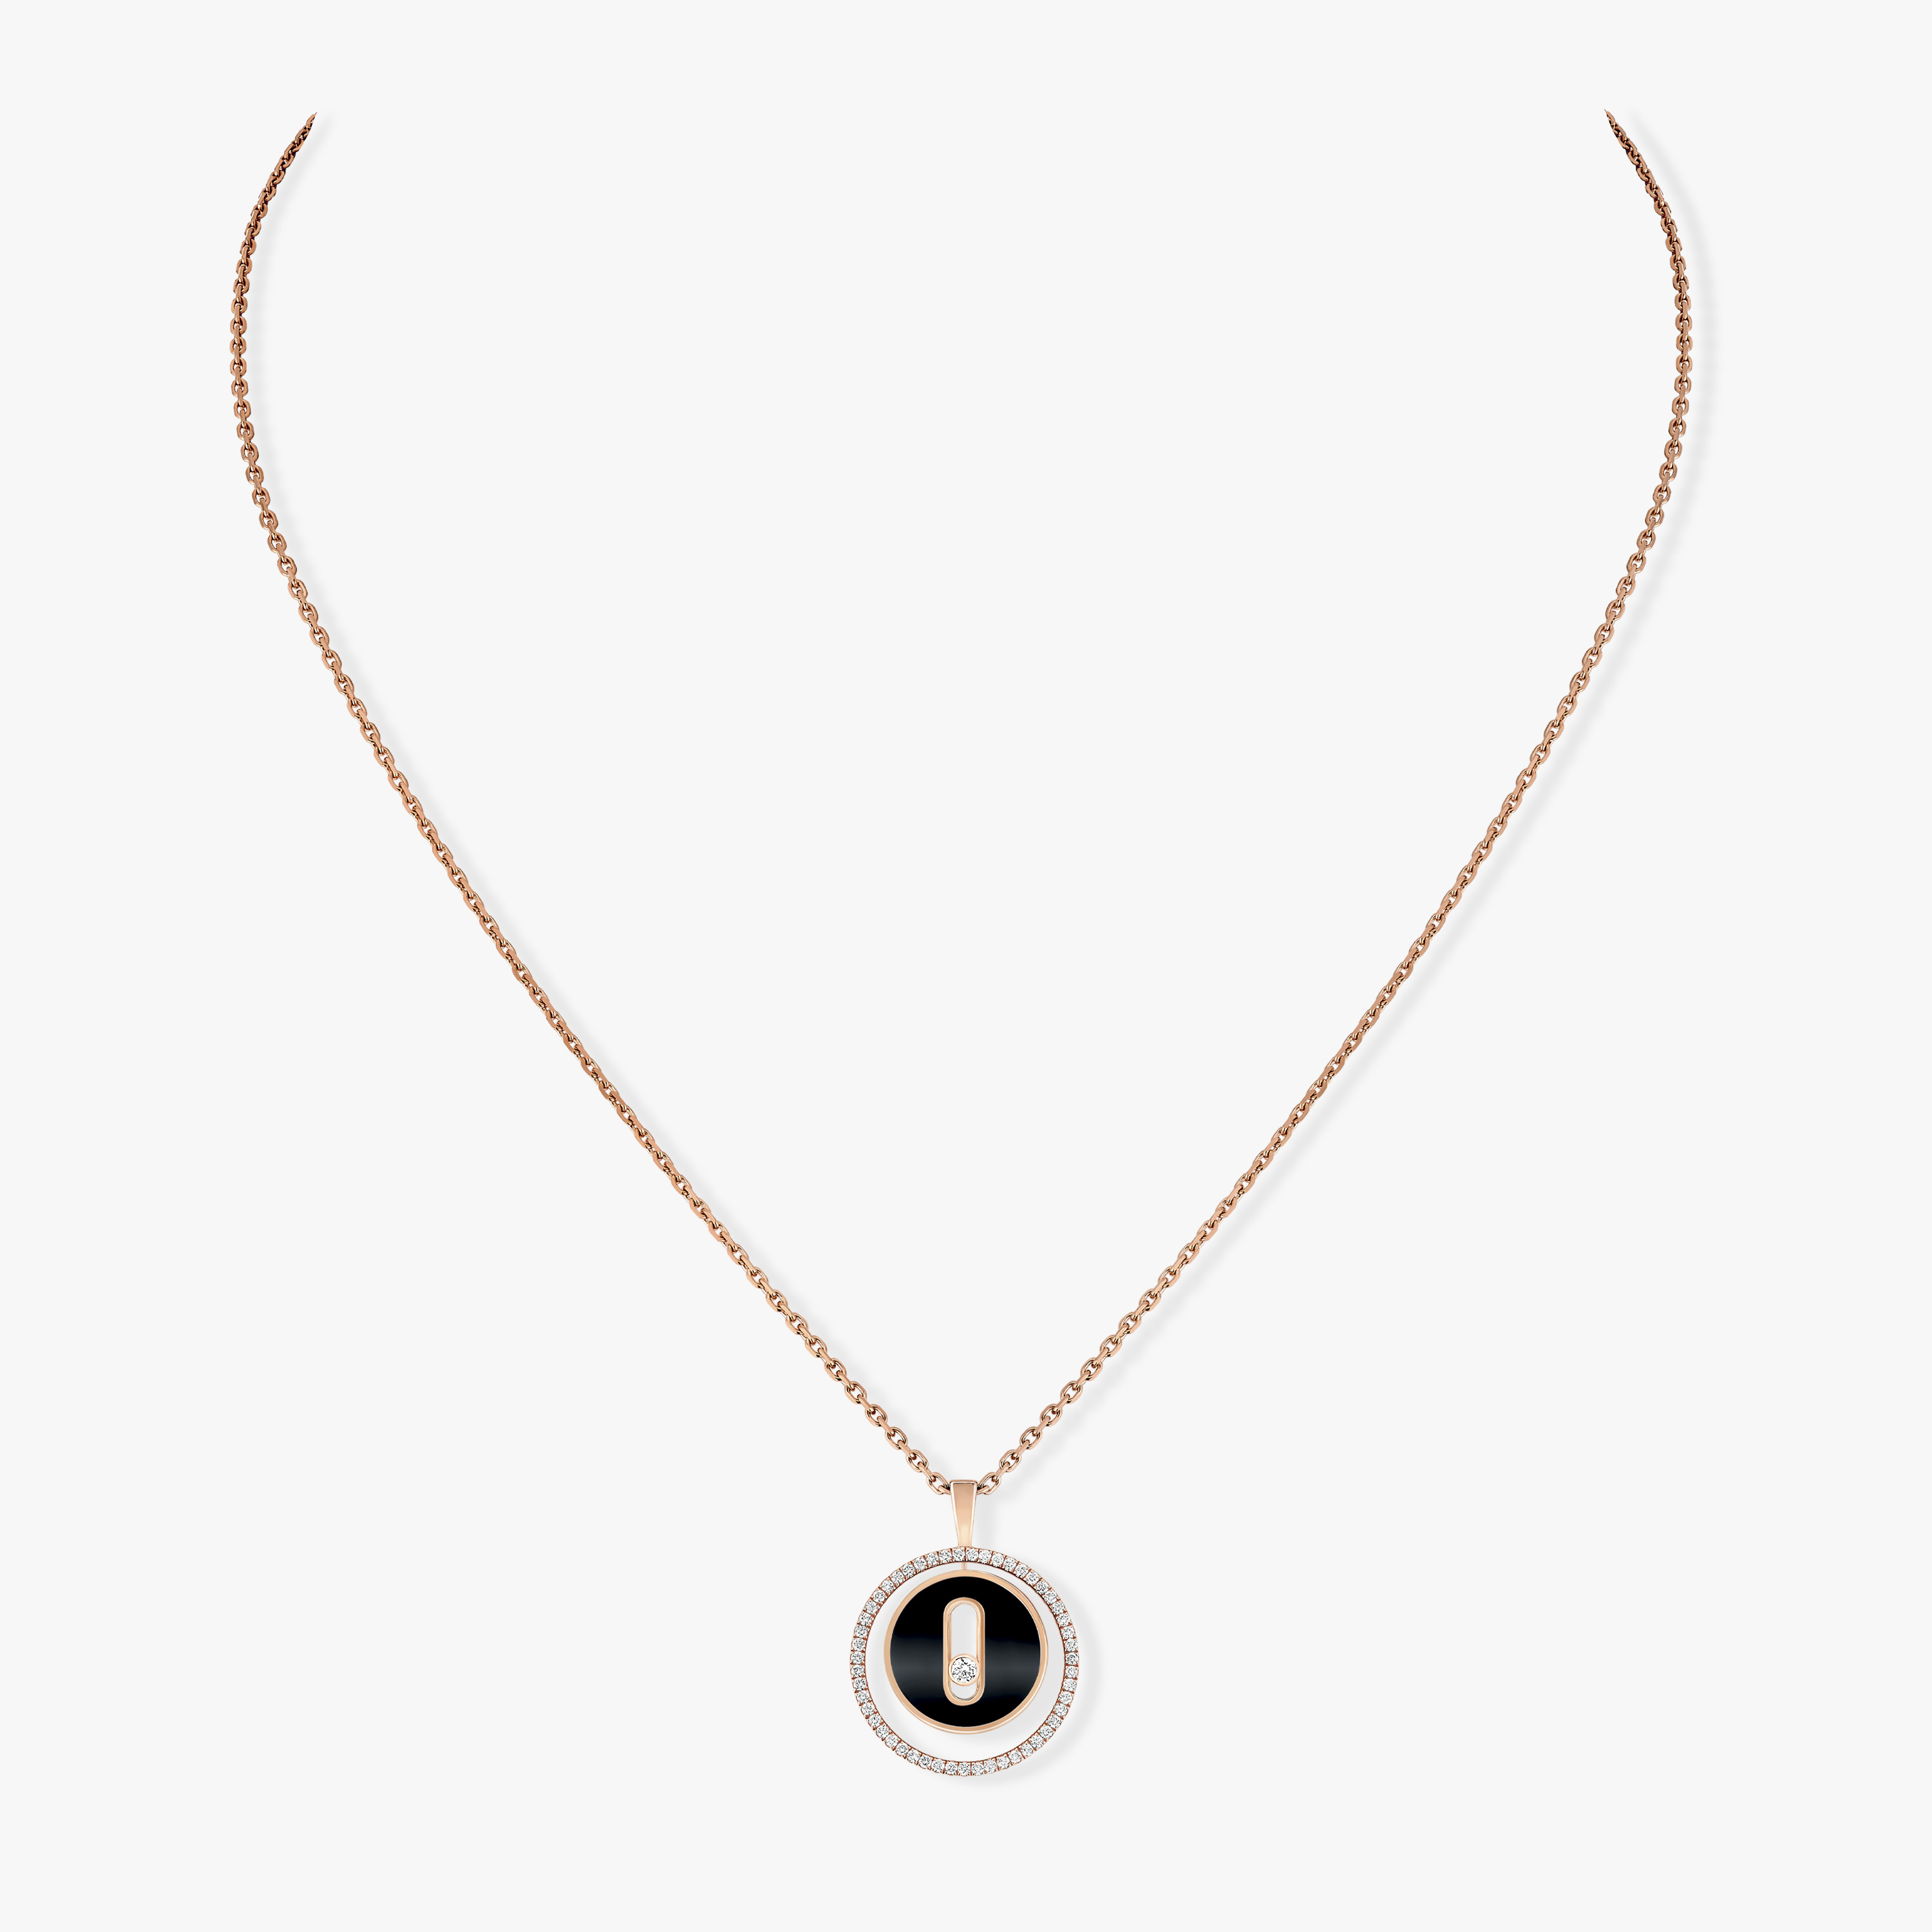 Lucky Move SM Onyx Necklace Pink Gold For Her Diamond Necklace 12317-PG